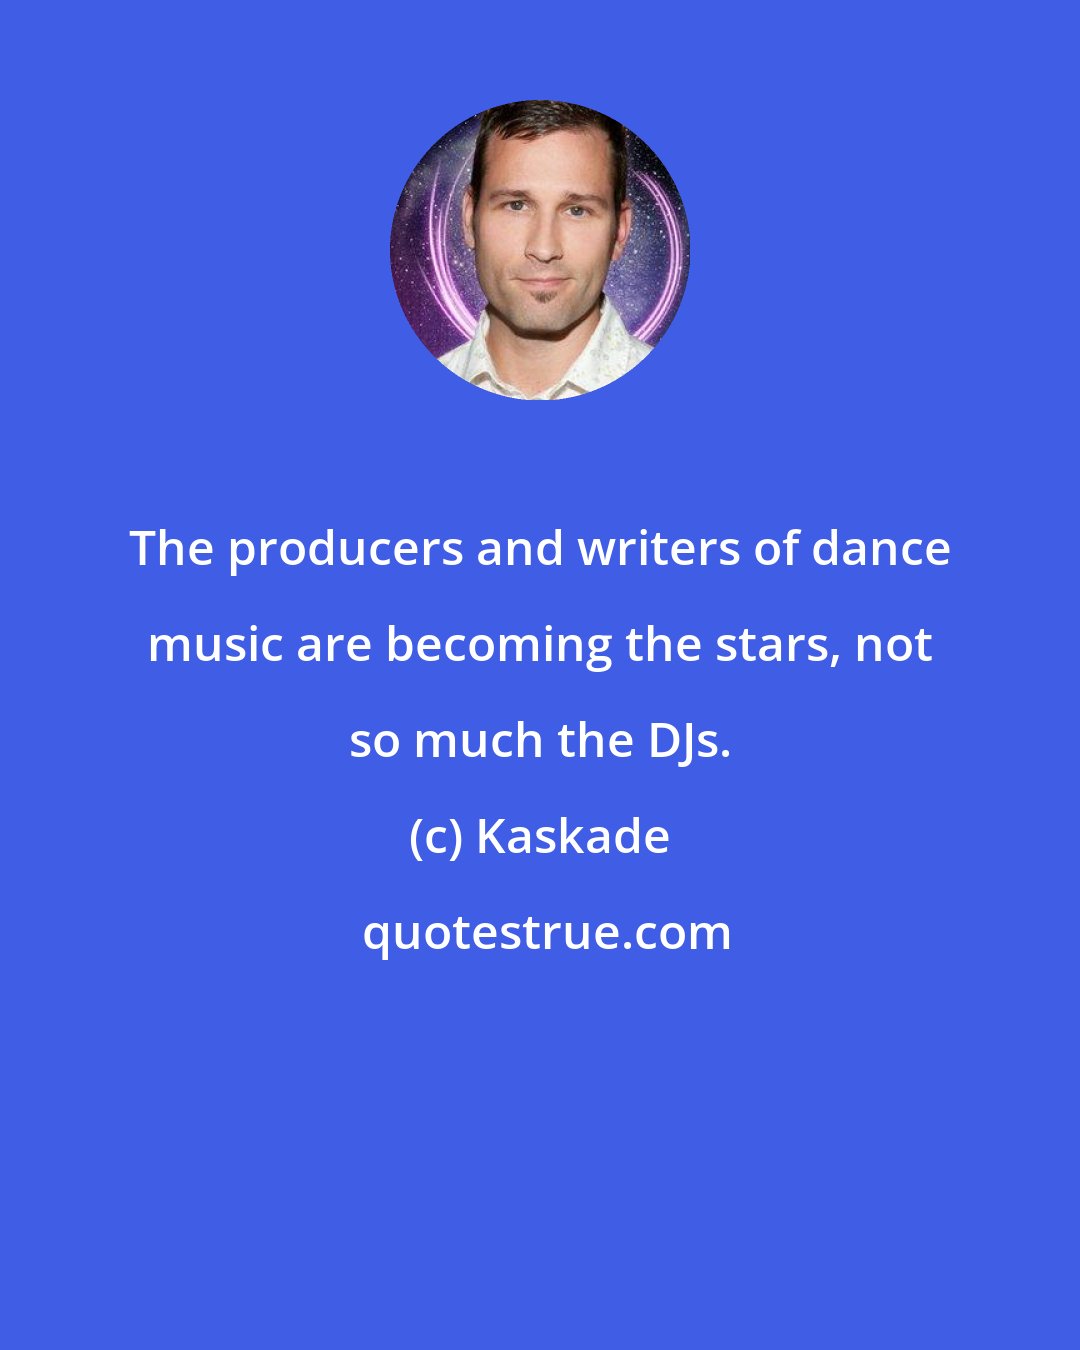 Kaskade: The producers and writers of dance music are becoming the stars, not so much the DJs.